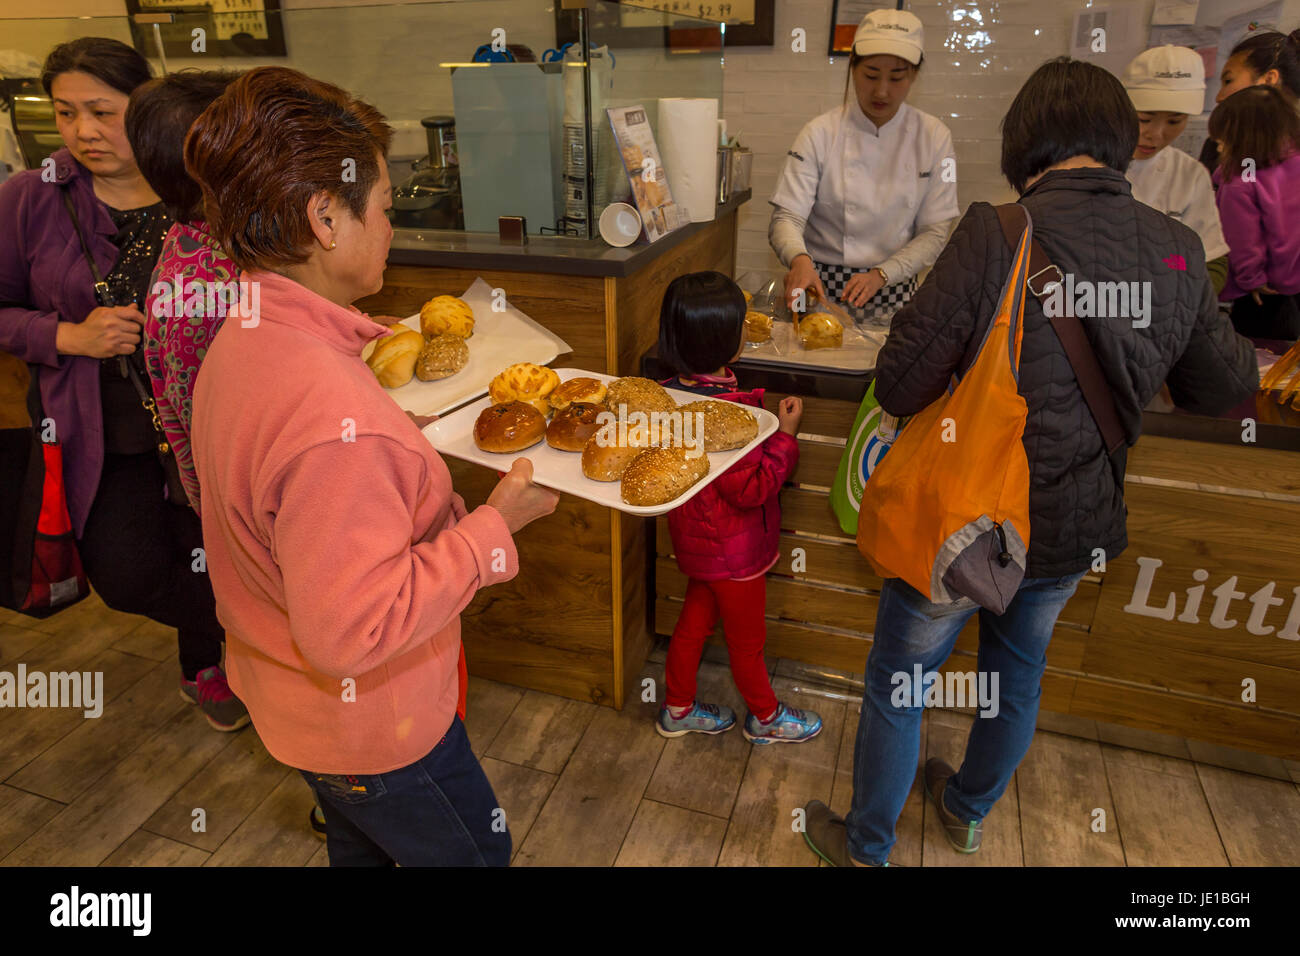 Chinese-Americans, Chinese-American people, shoppers, shopping, Little Swan Bakery, Stockton Street, Chinatown, San Francisco, California Stock Photo